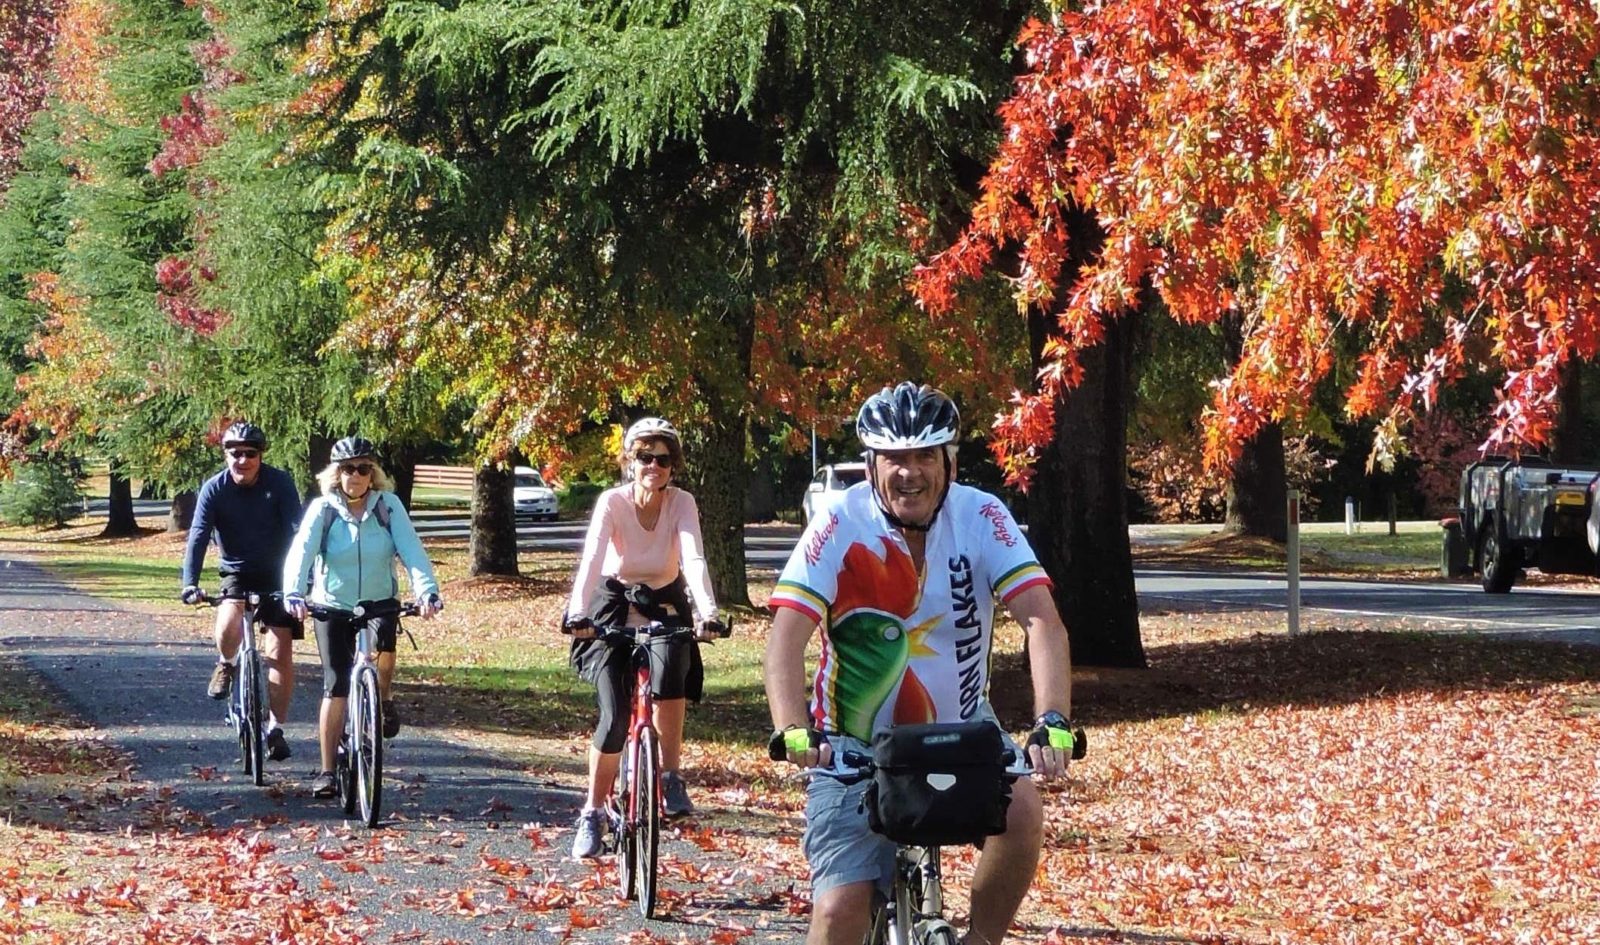 Autumn is a great time for cycling in N.N. Victoria